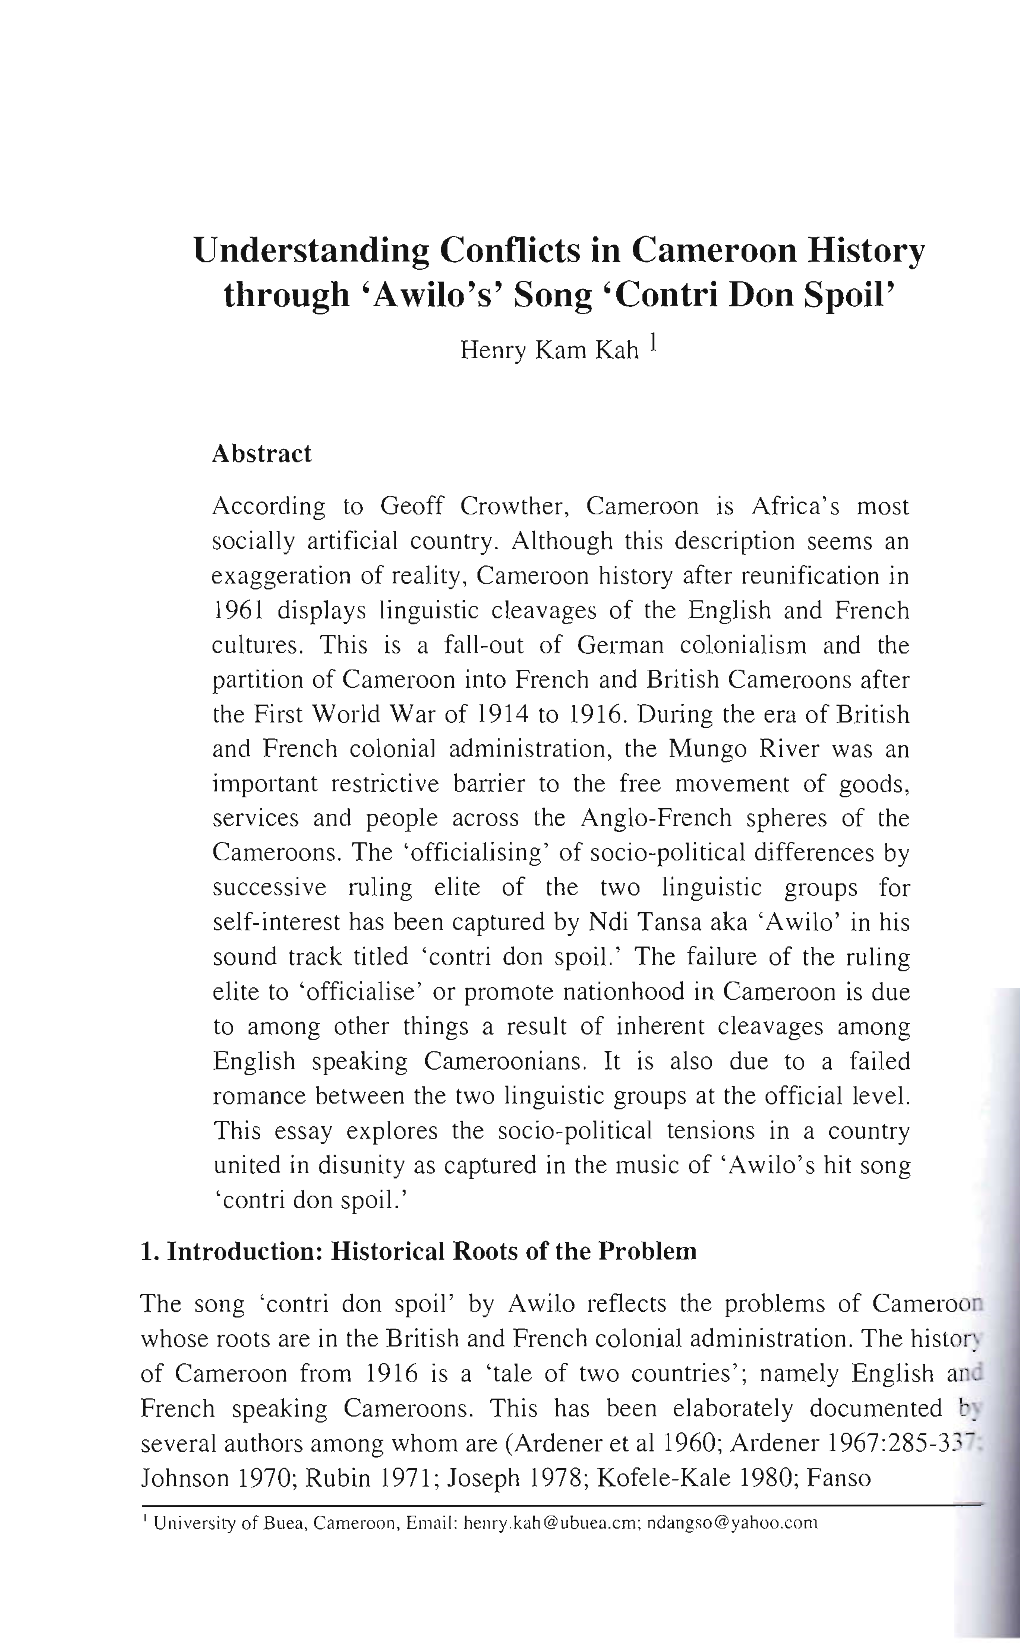 Understanding Conflicts in Cameroon History Through 'Awilo's' Song 'Contri Don Spoil' Henry Kam Kah 1